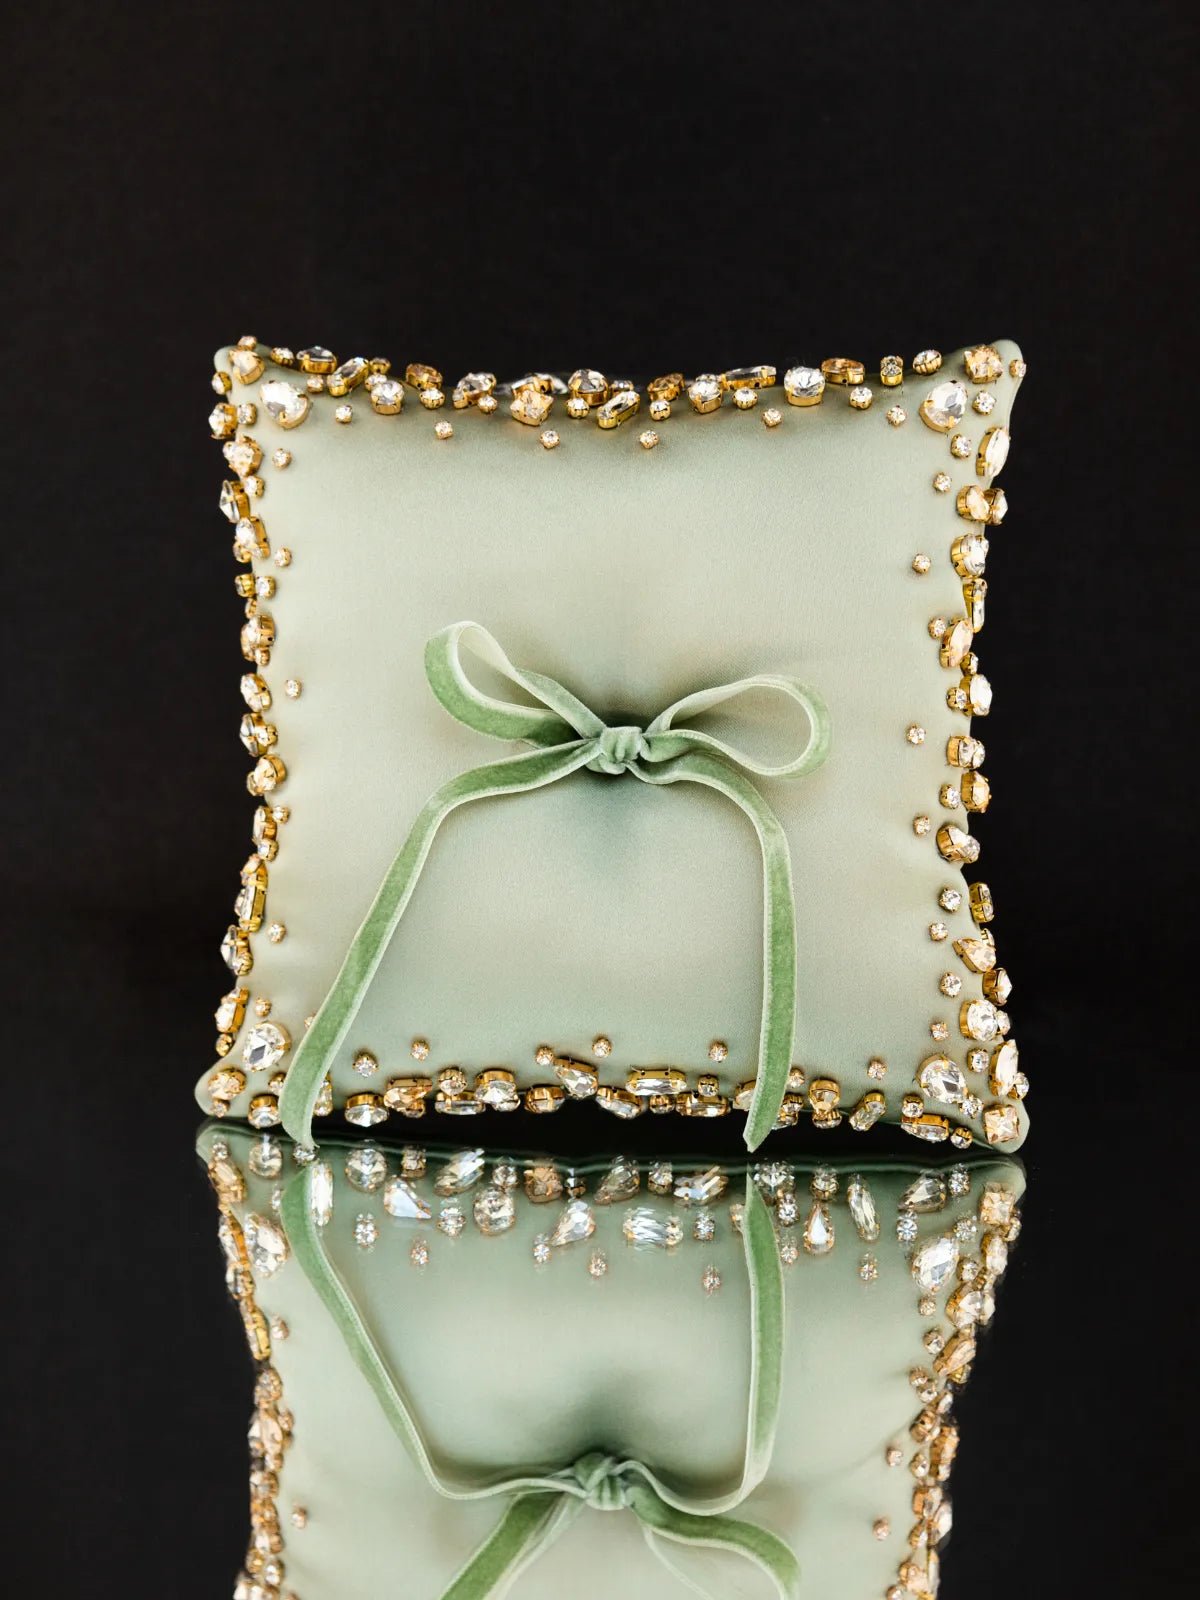 Wedding Pillow For Rings In Olive - ELENA HONCH